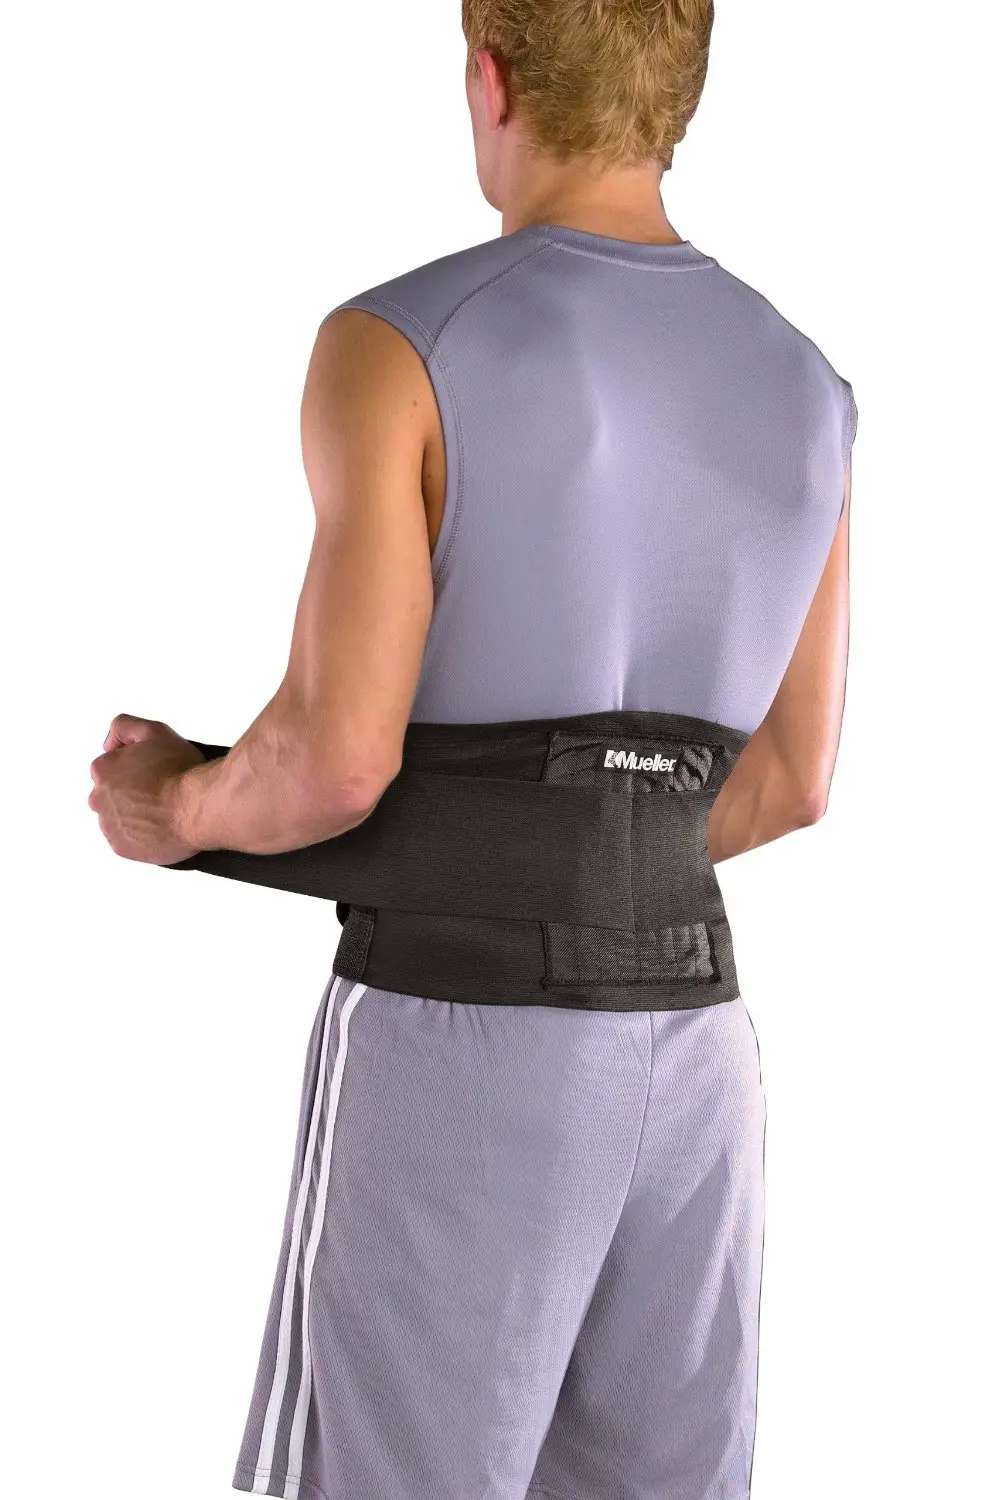 Lumbar Back Brace: How to Use it &  the Best One in 2017